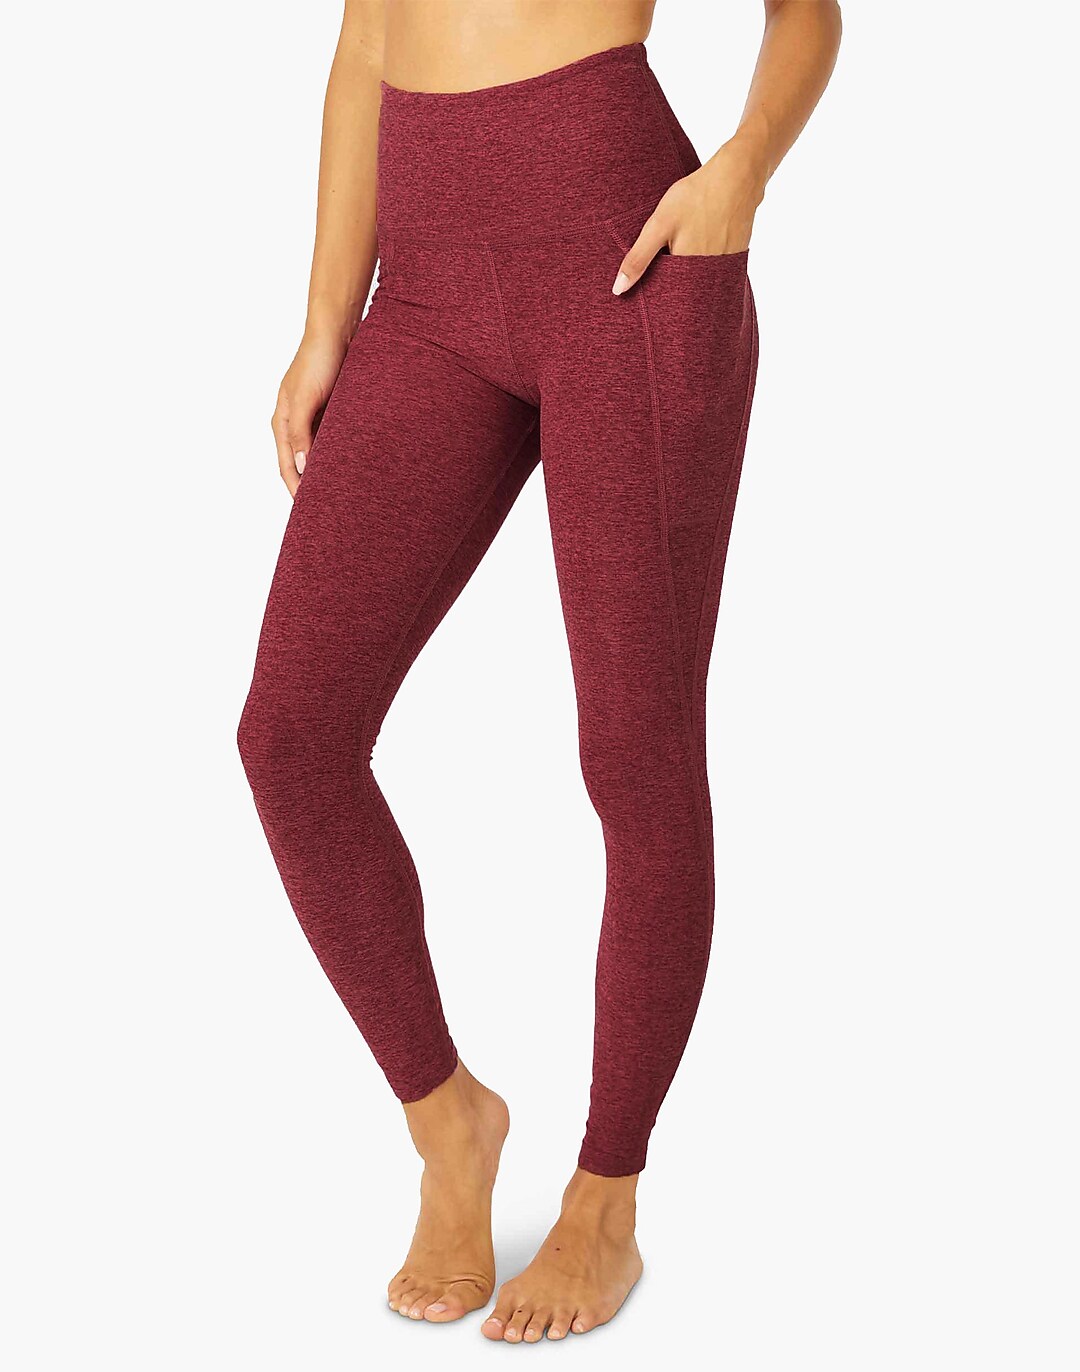 Beyond Yoga Out of Pocket High-Waisted Midi Leggings in Spacedye